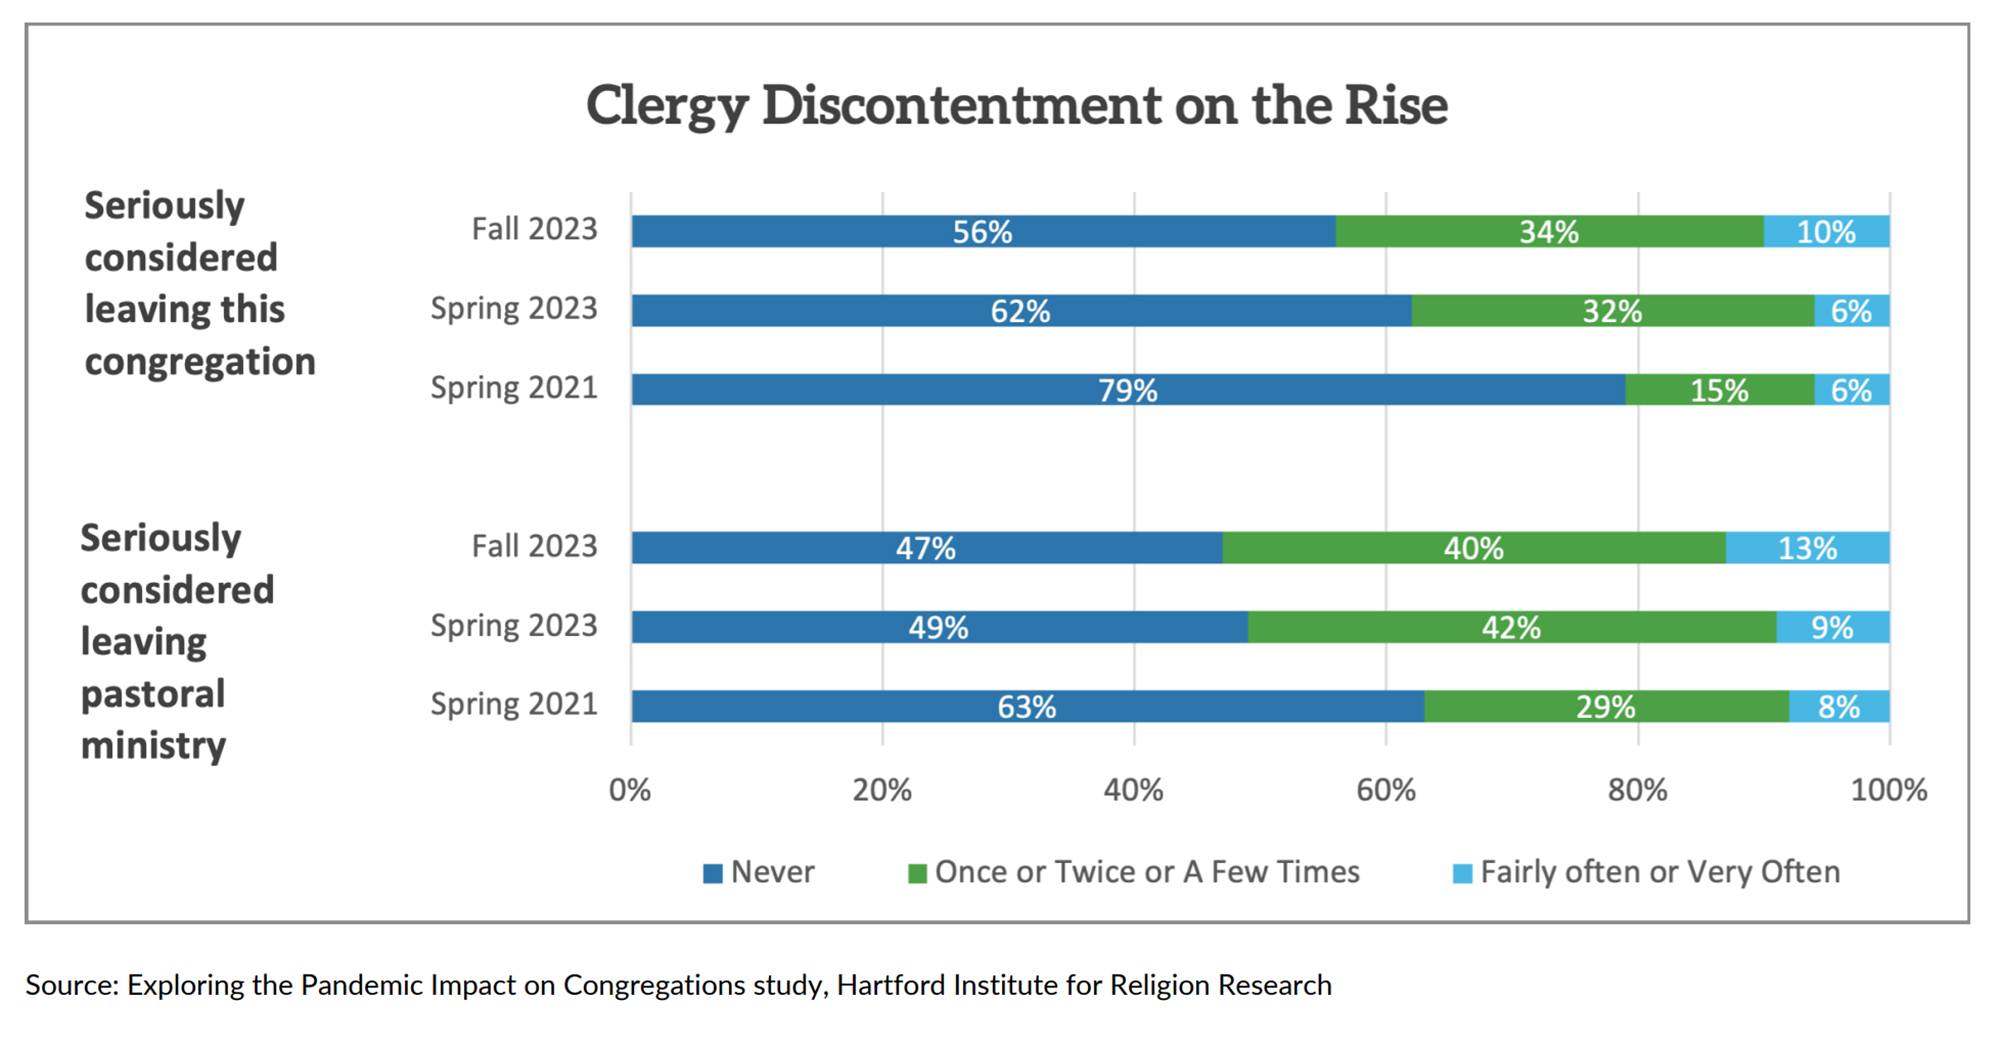 "Clergy Discontentment on the Rise" (Graphic courtesy HIRR)